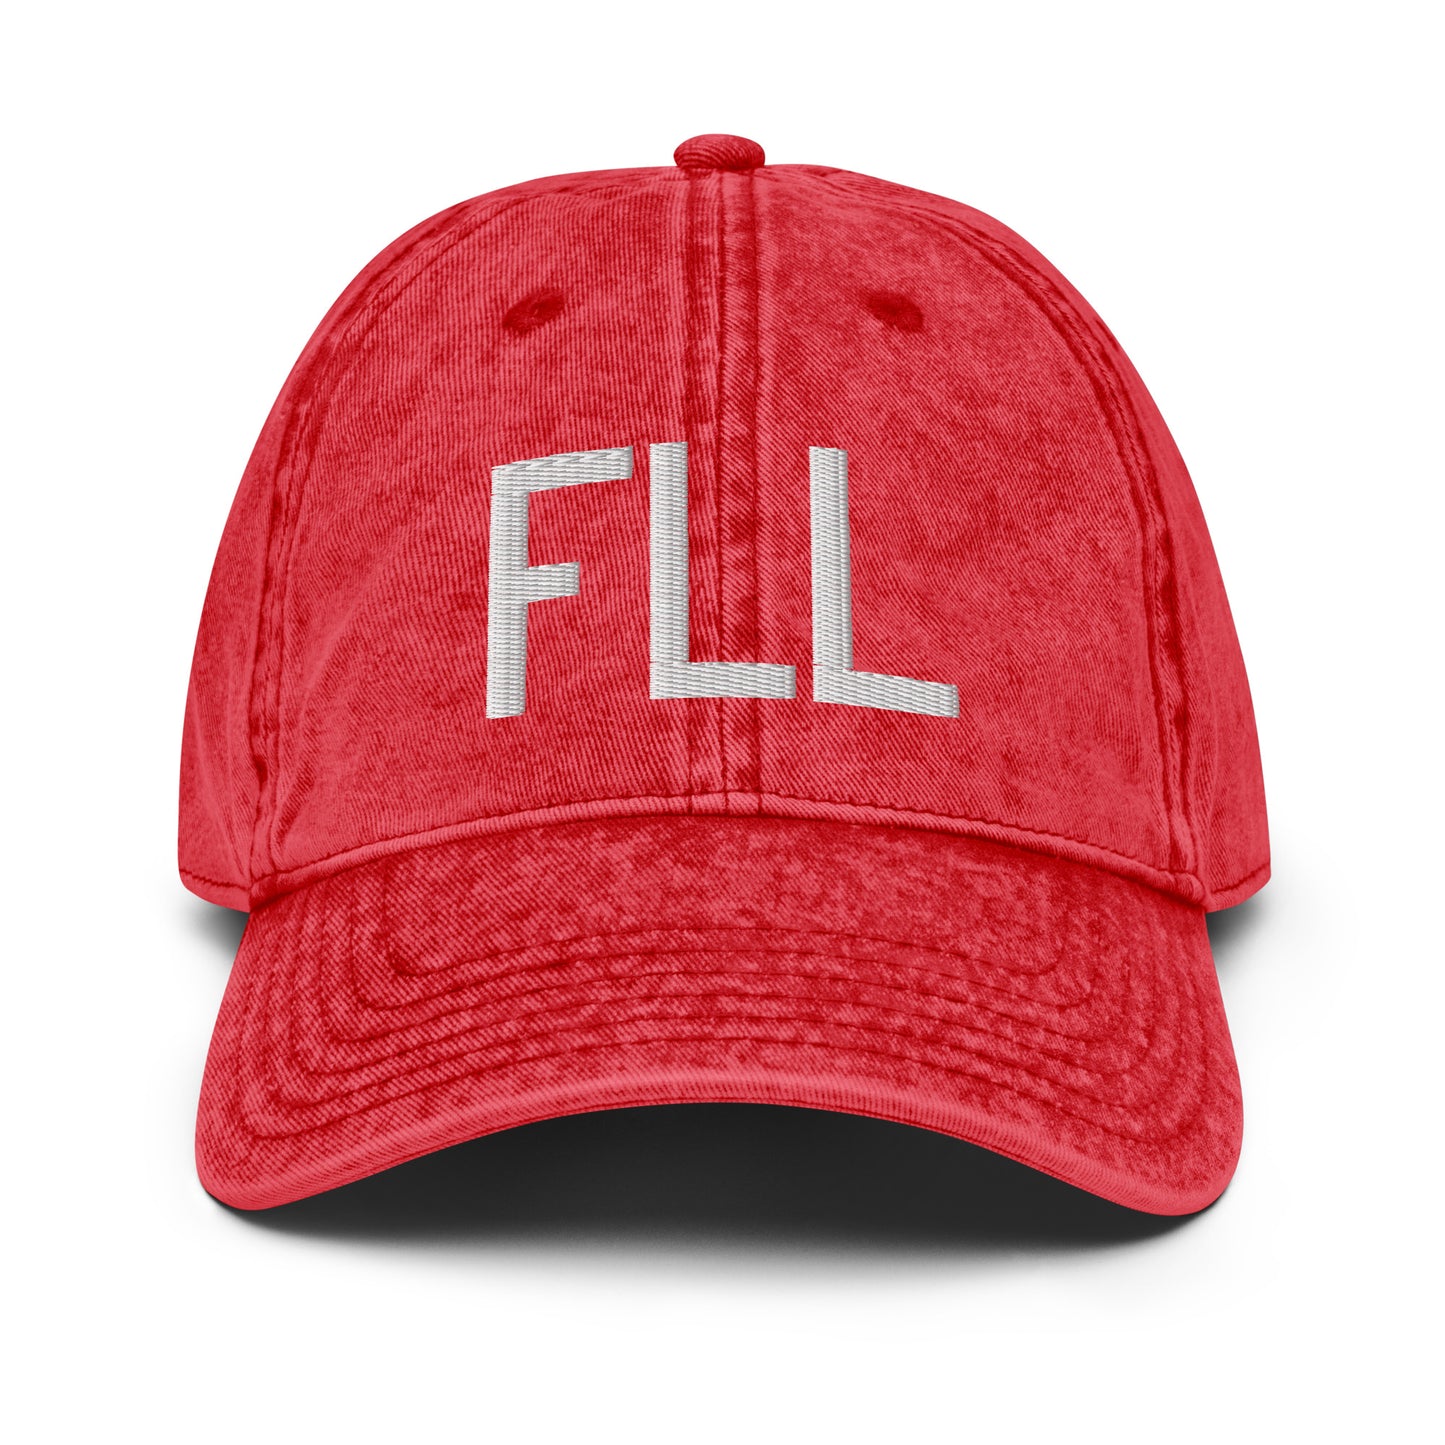 Airport Code Twill Cap - White • FLL Fort Lauderdale • YHM Designs - Image 22